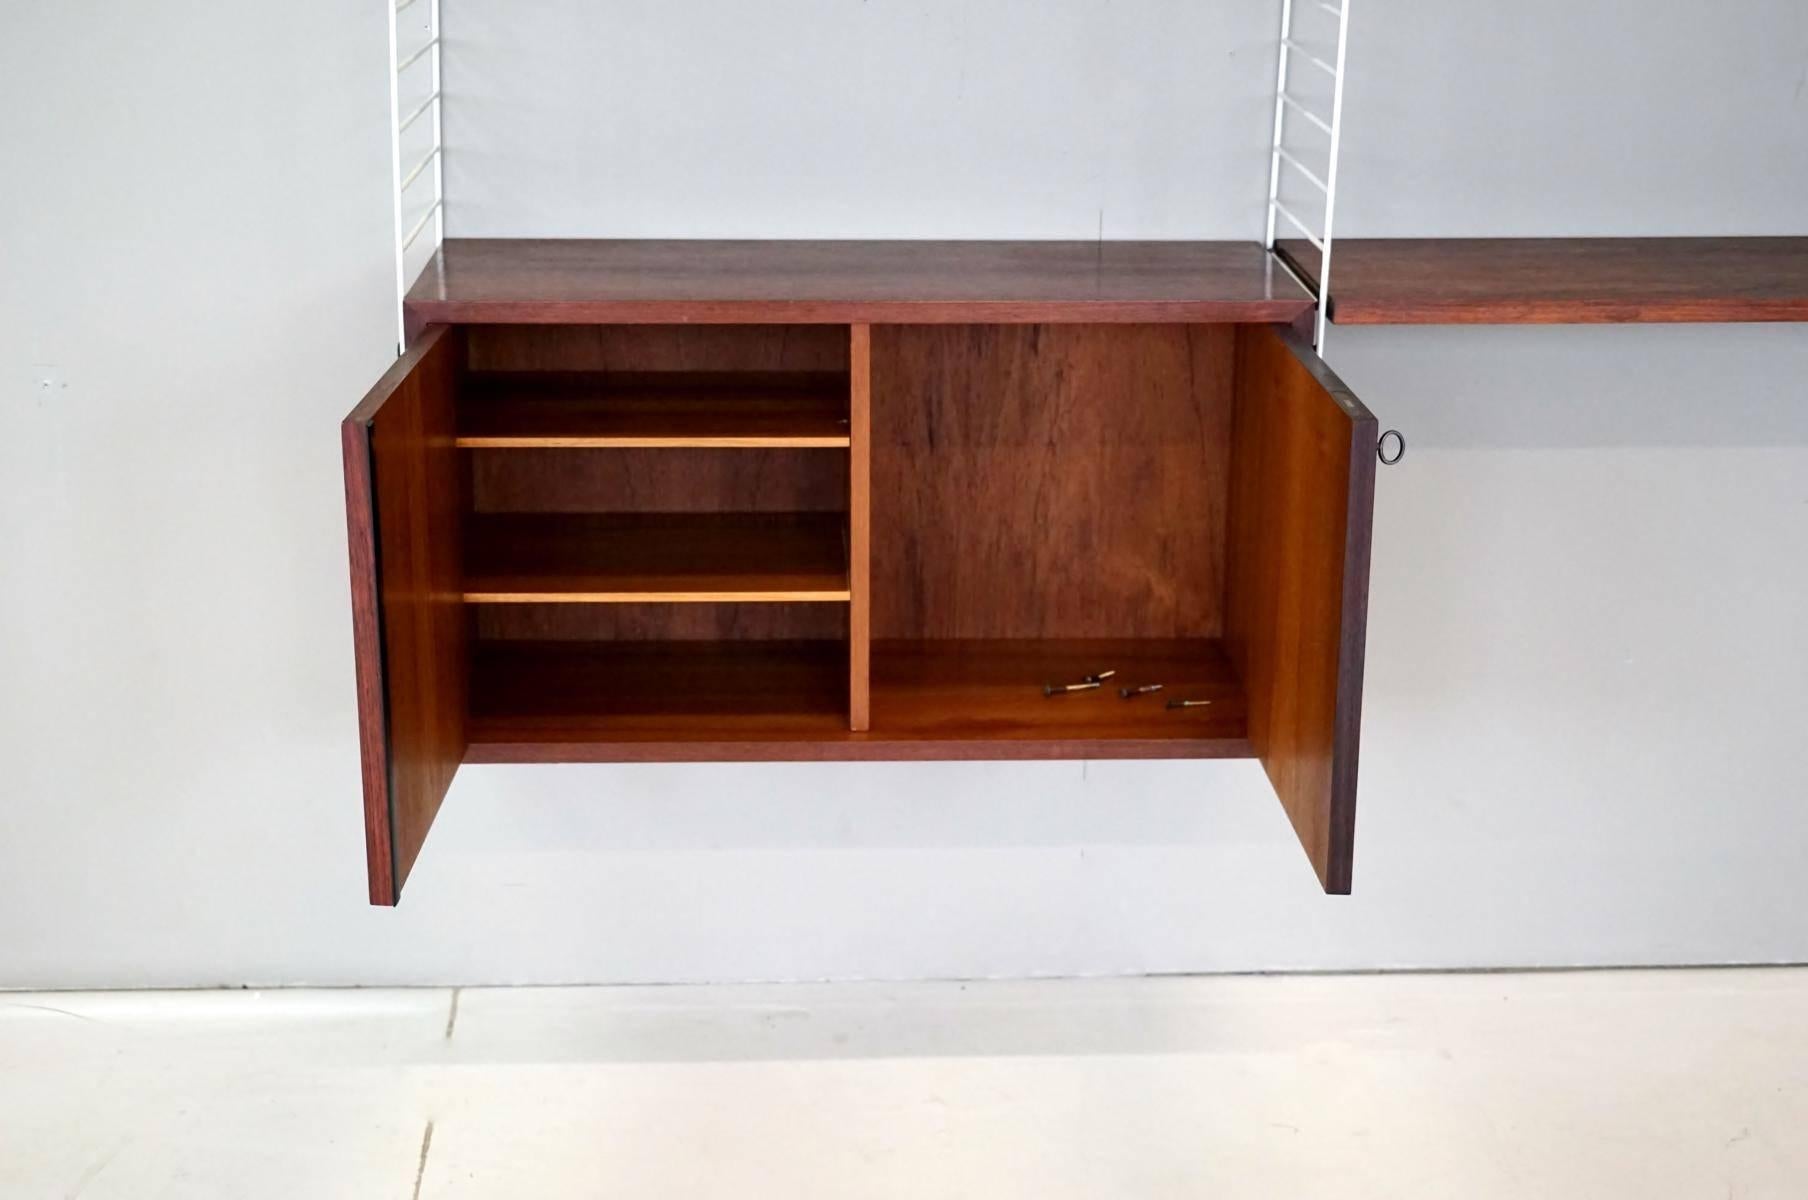 Box and Wall Unit String Shelf Rack System by Nisse Strinning, 1960s For Sale 2